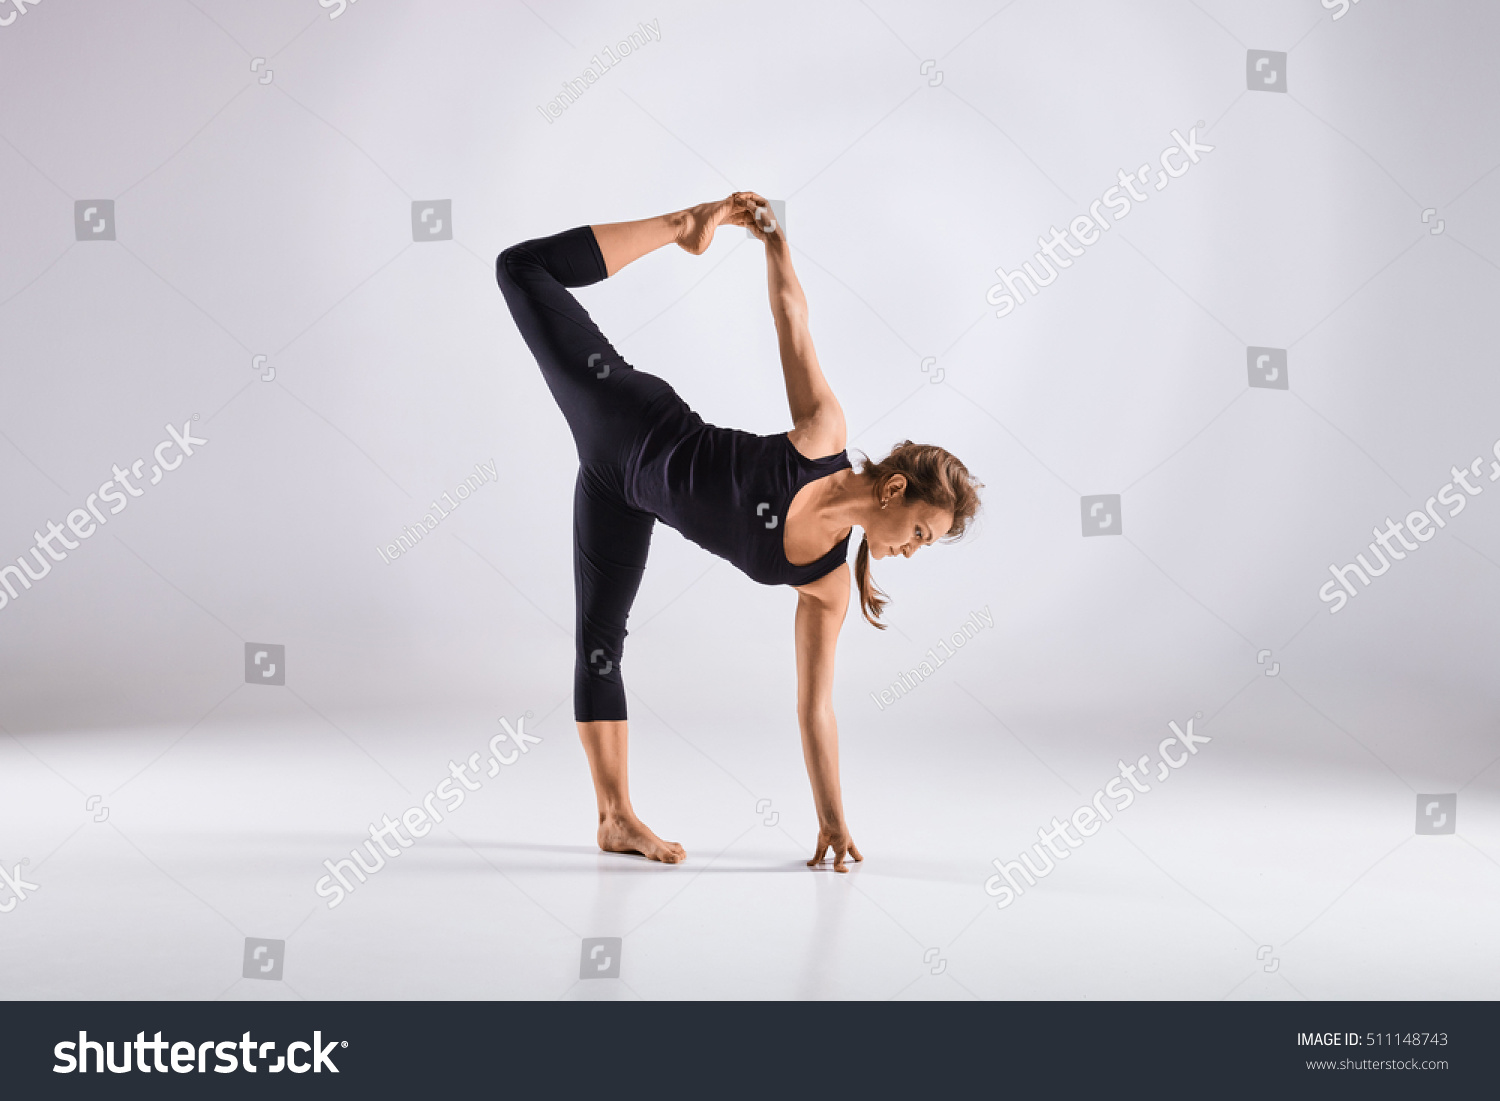 Sporty middle age woman doing yoga practice isolated on white background - concept of healthy life and natural balance between physical and mental evolution #511148743